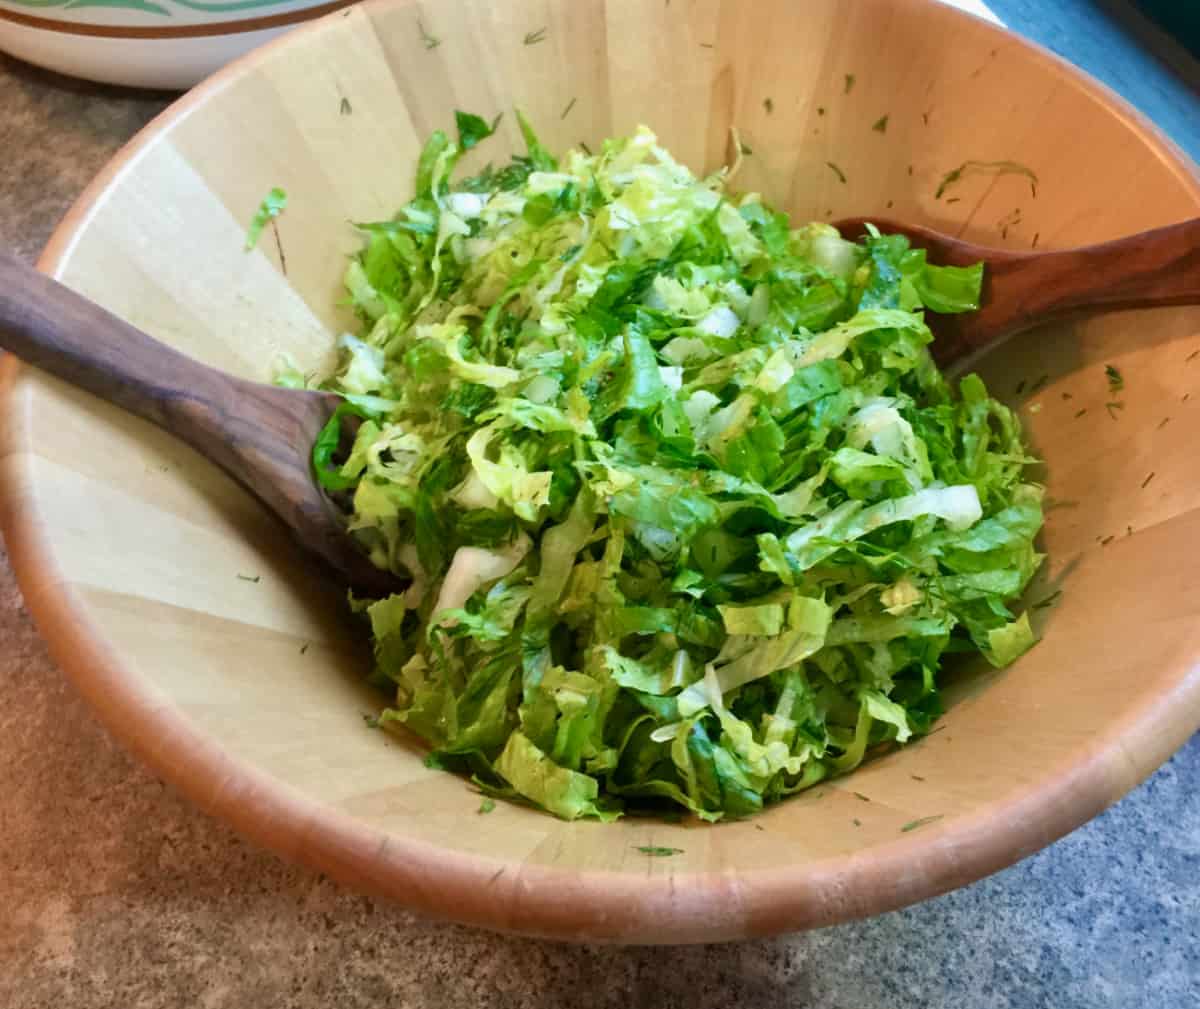 Shredded romaine salad with dill in wooden salad bowl.